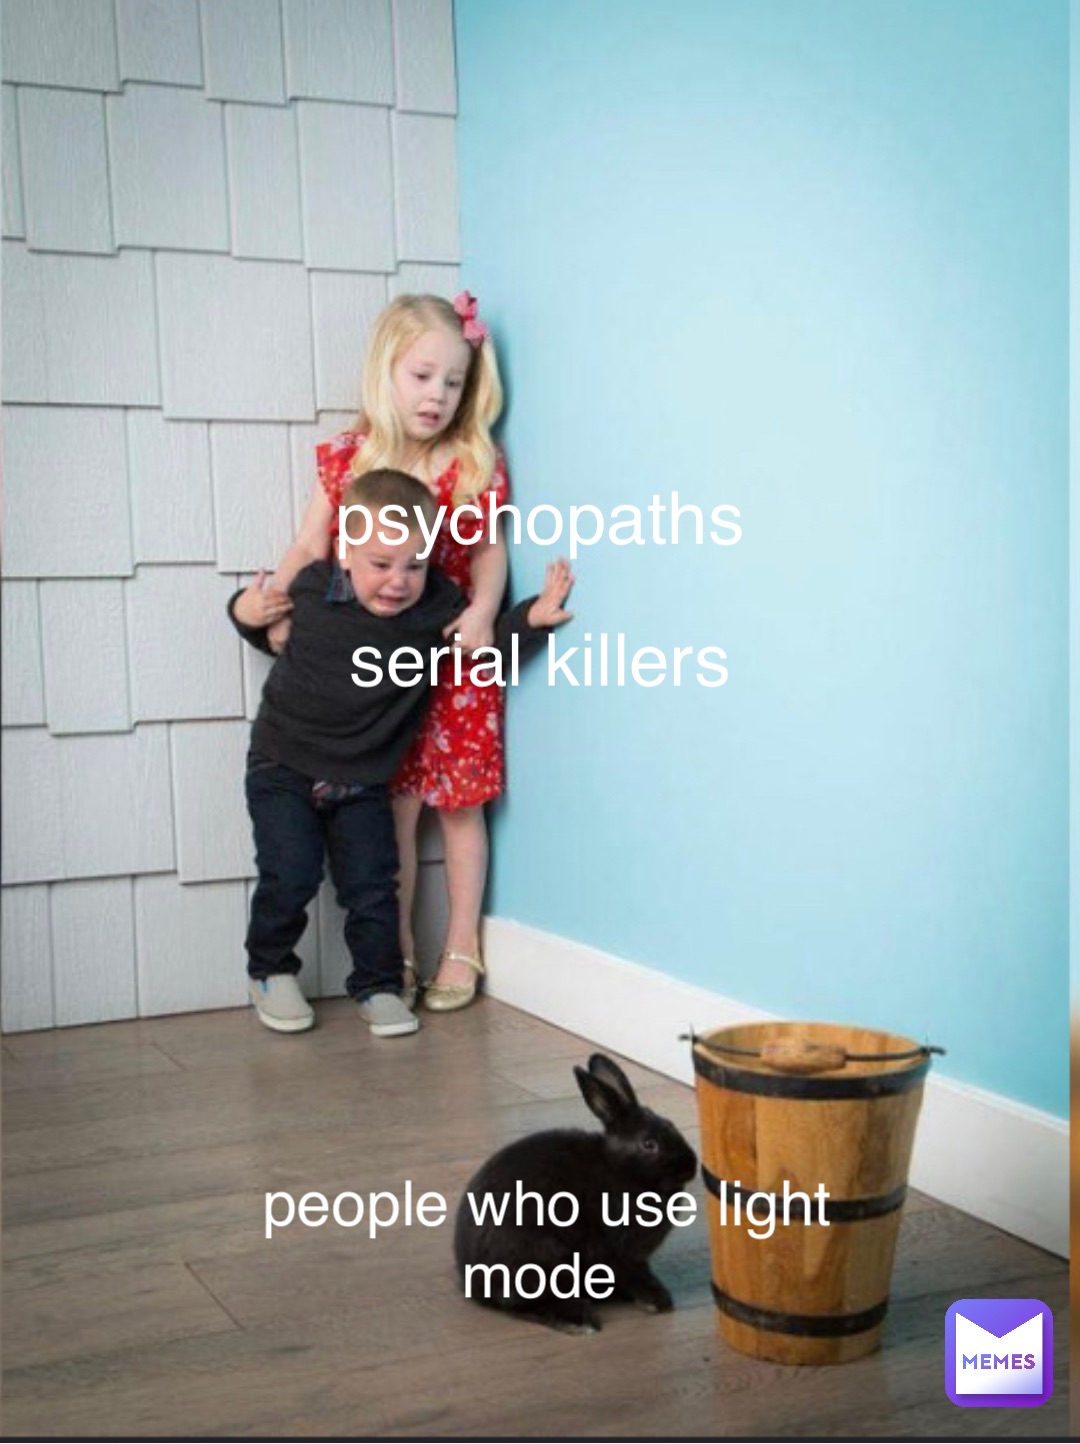 psychopaths serial killers people who use light mode